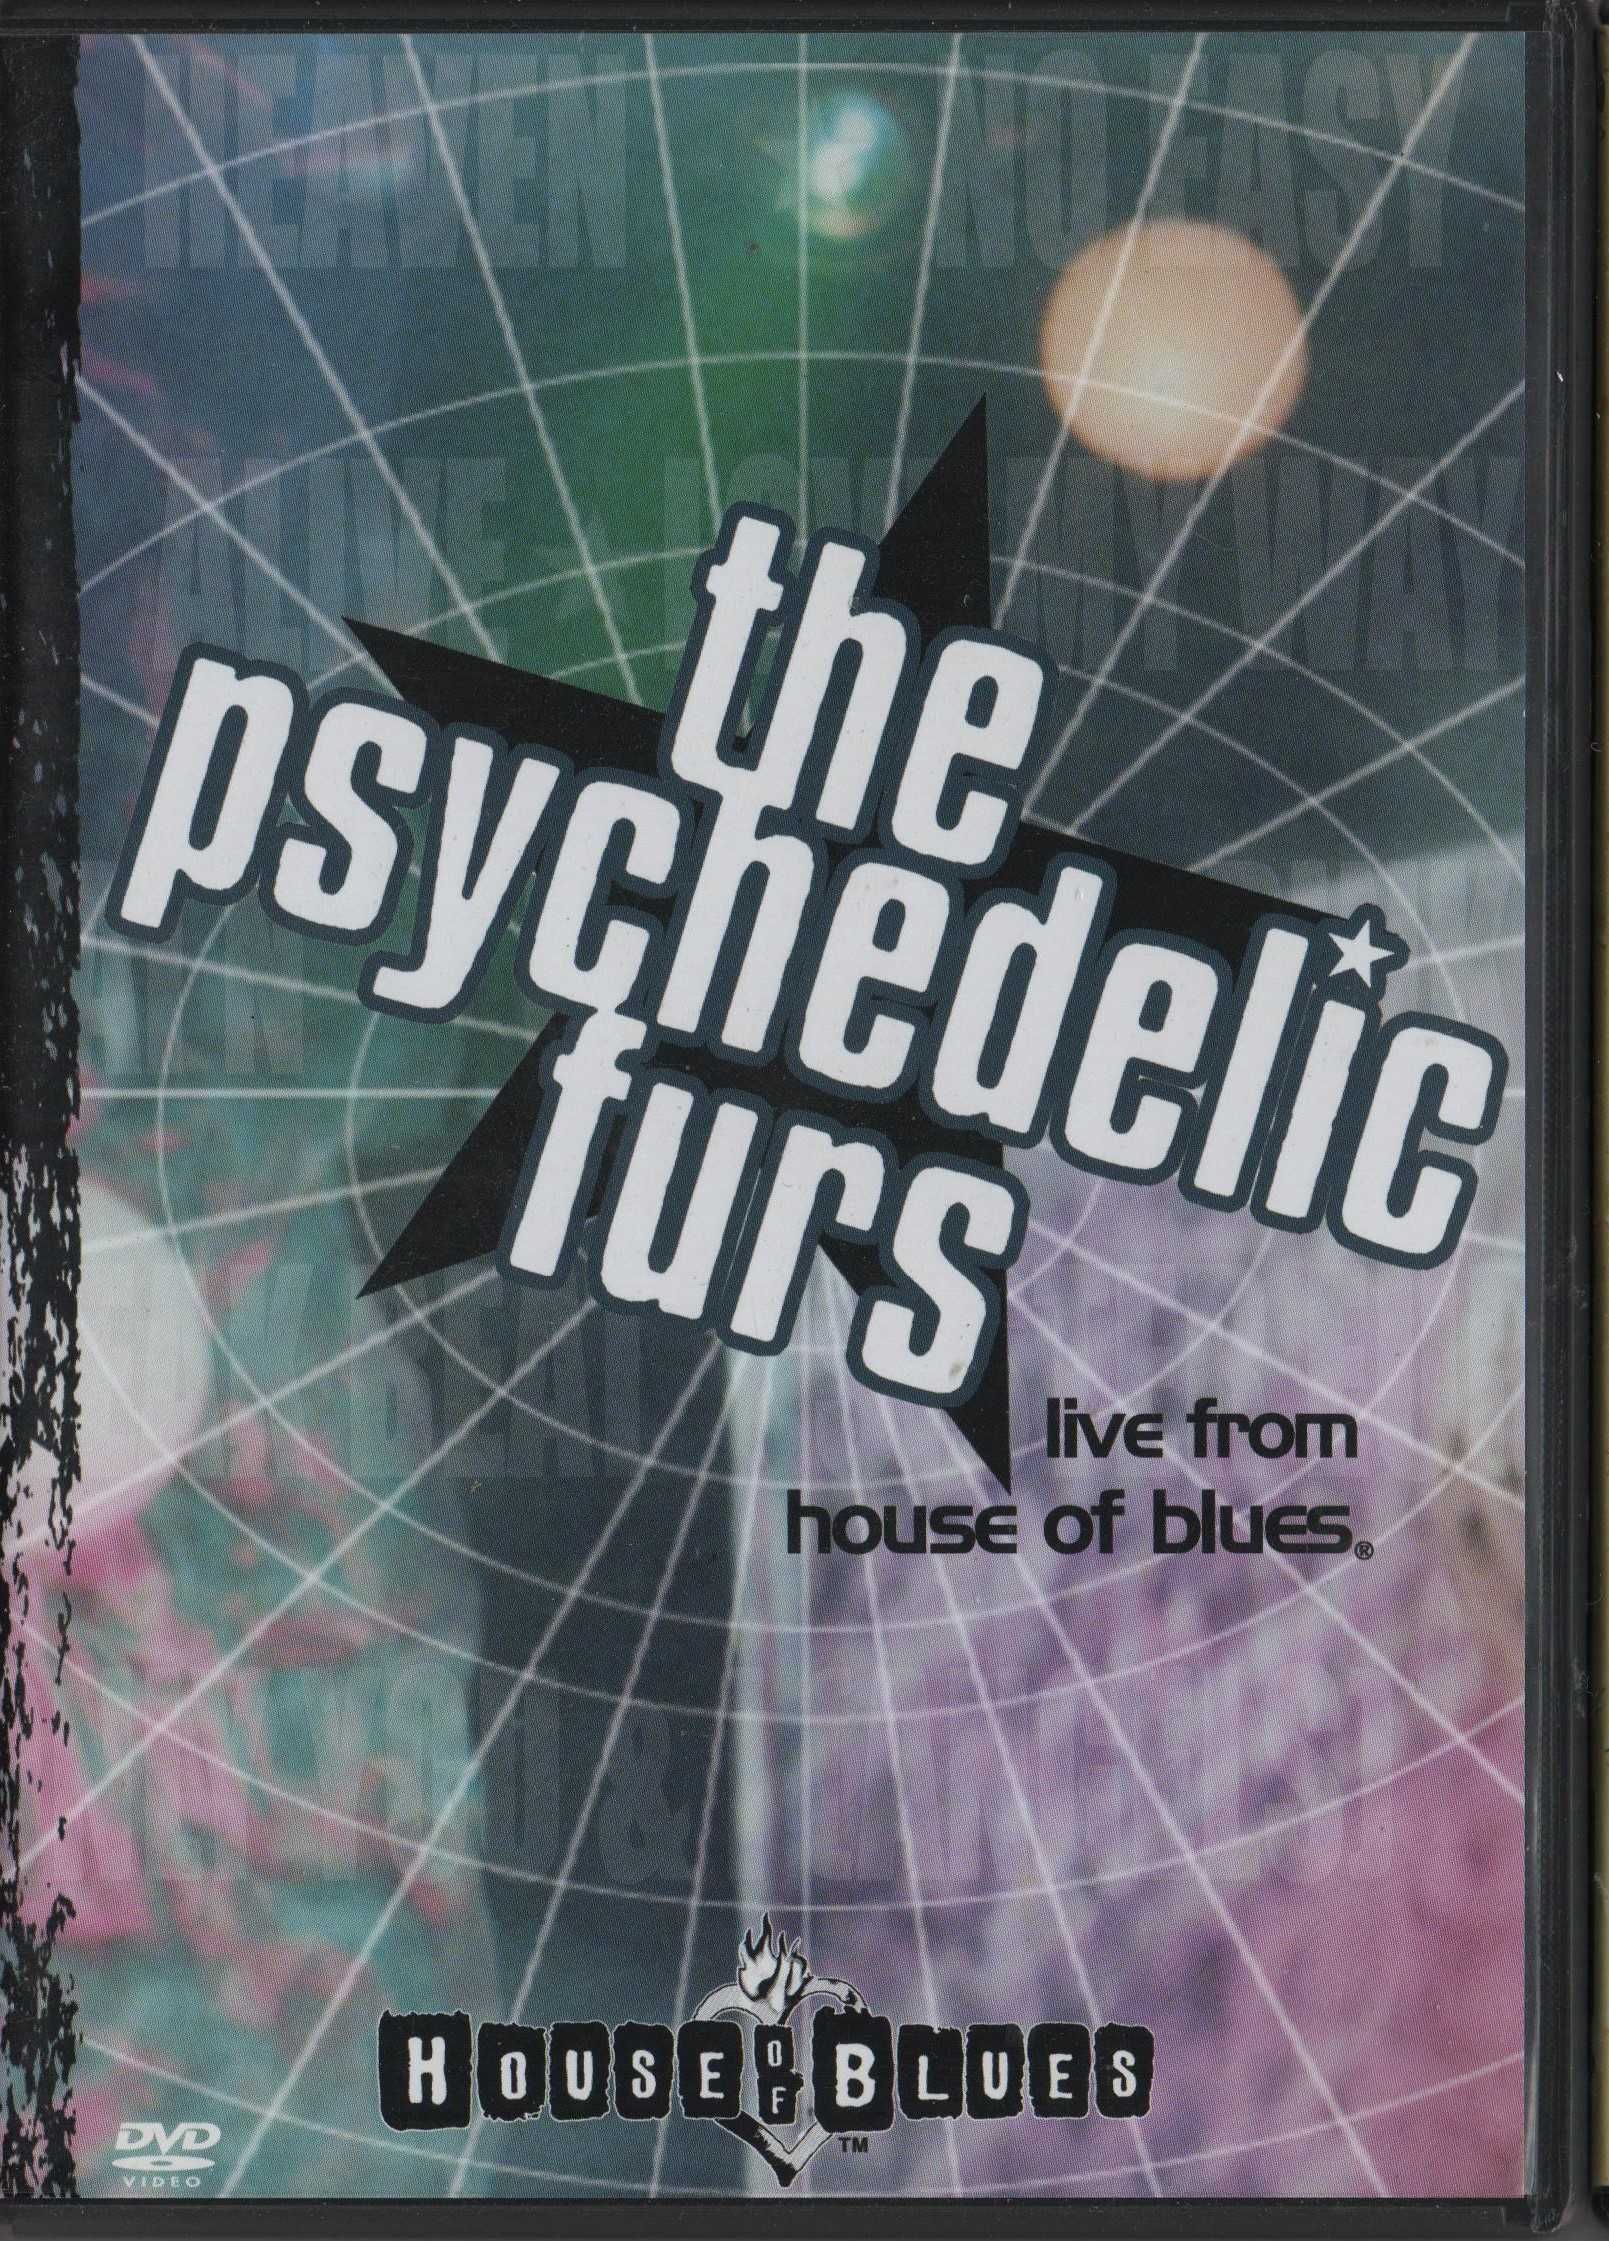 Dvd The Psychedelic Furs Live From House of Blues - musical - extras